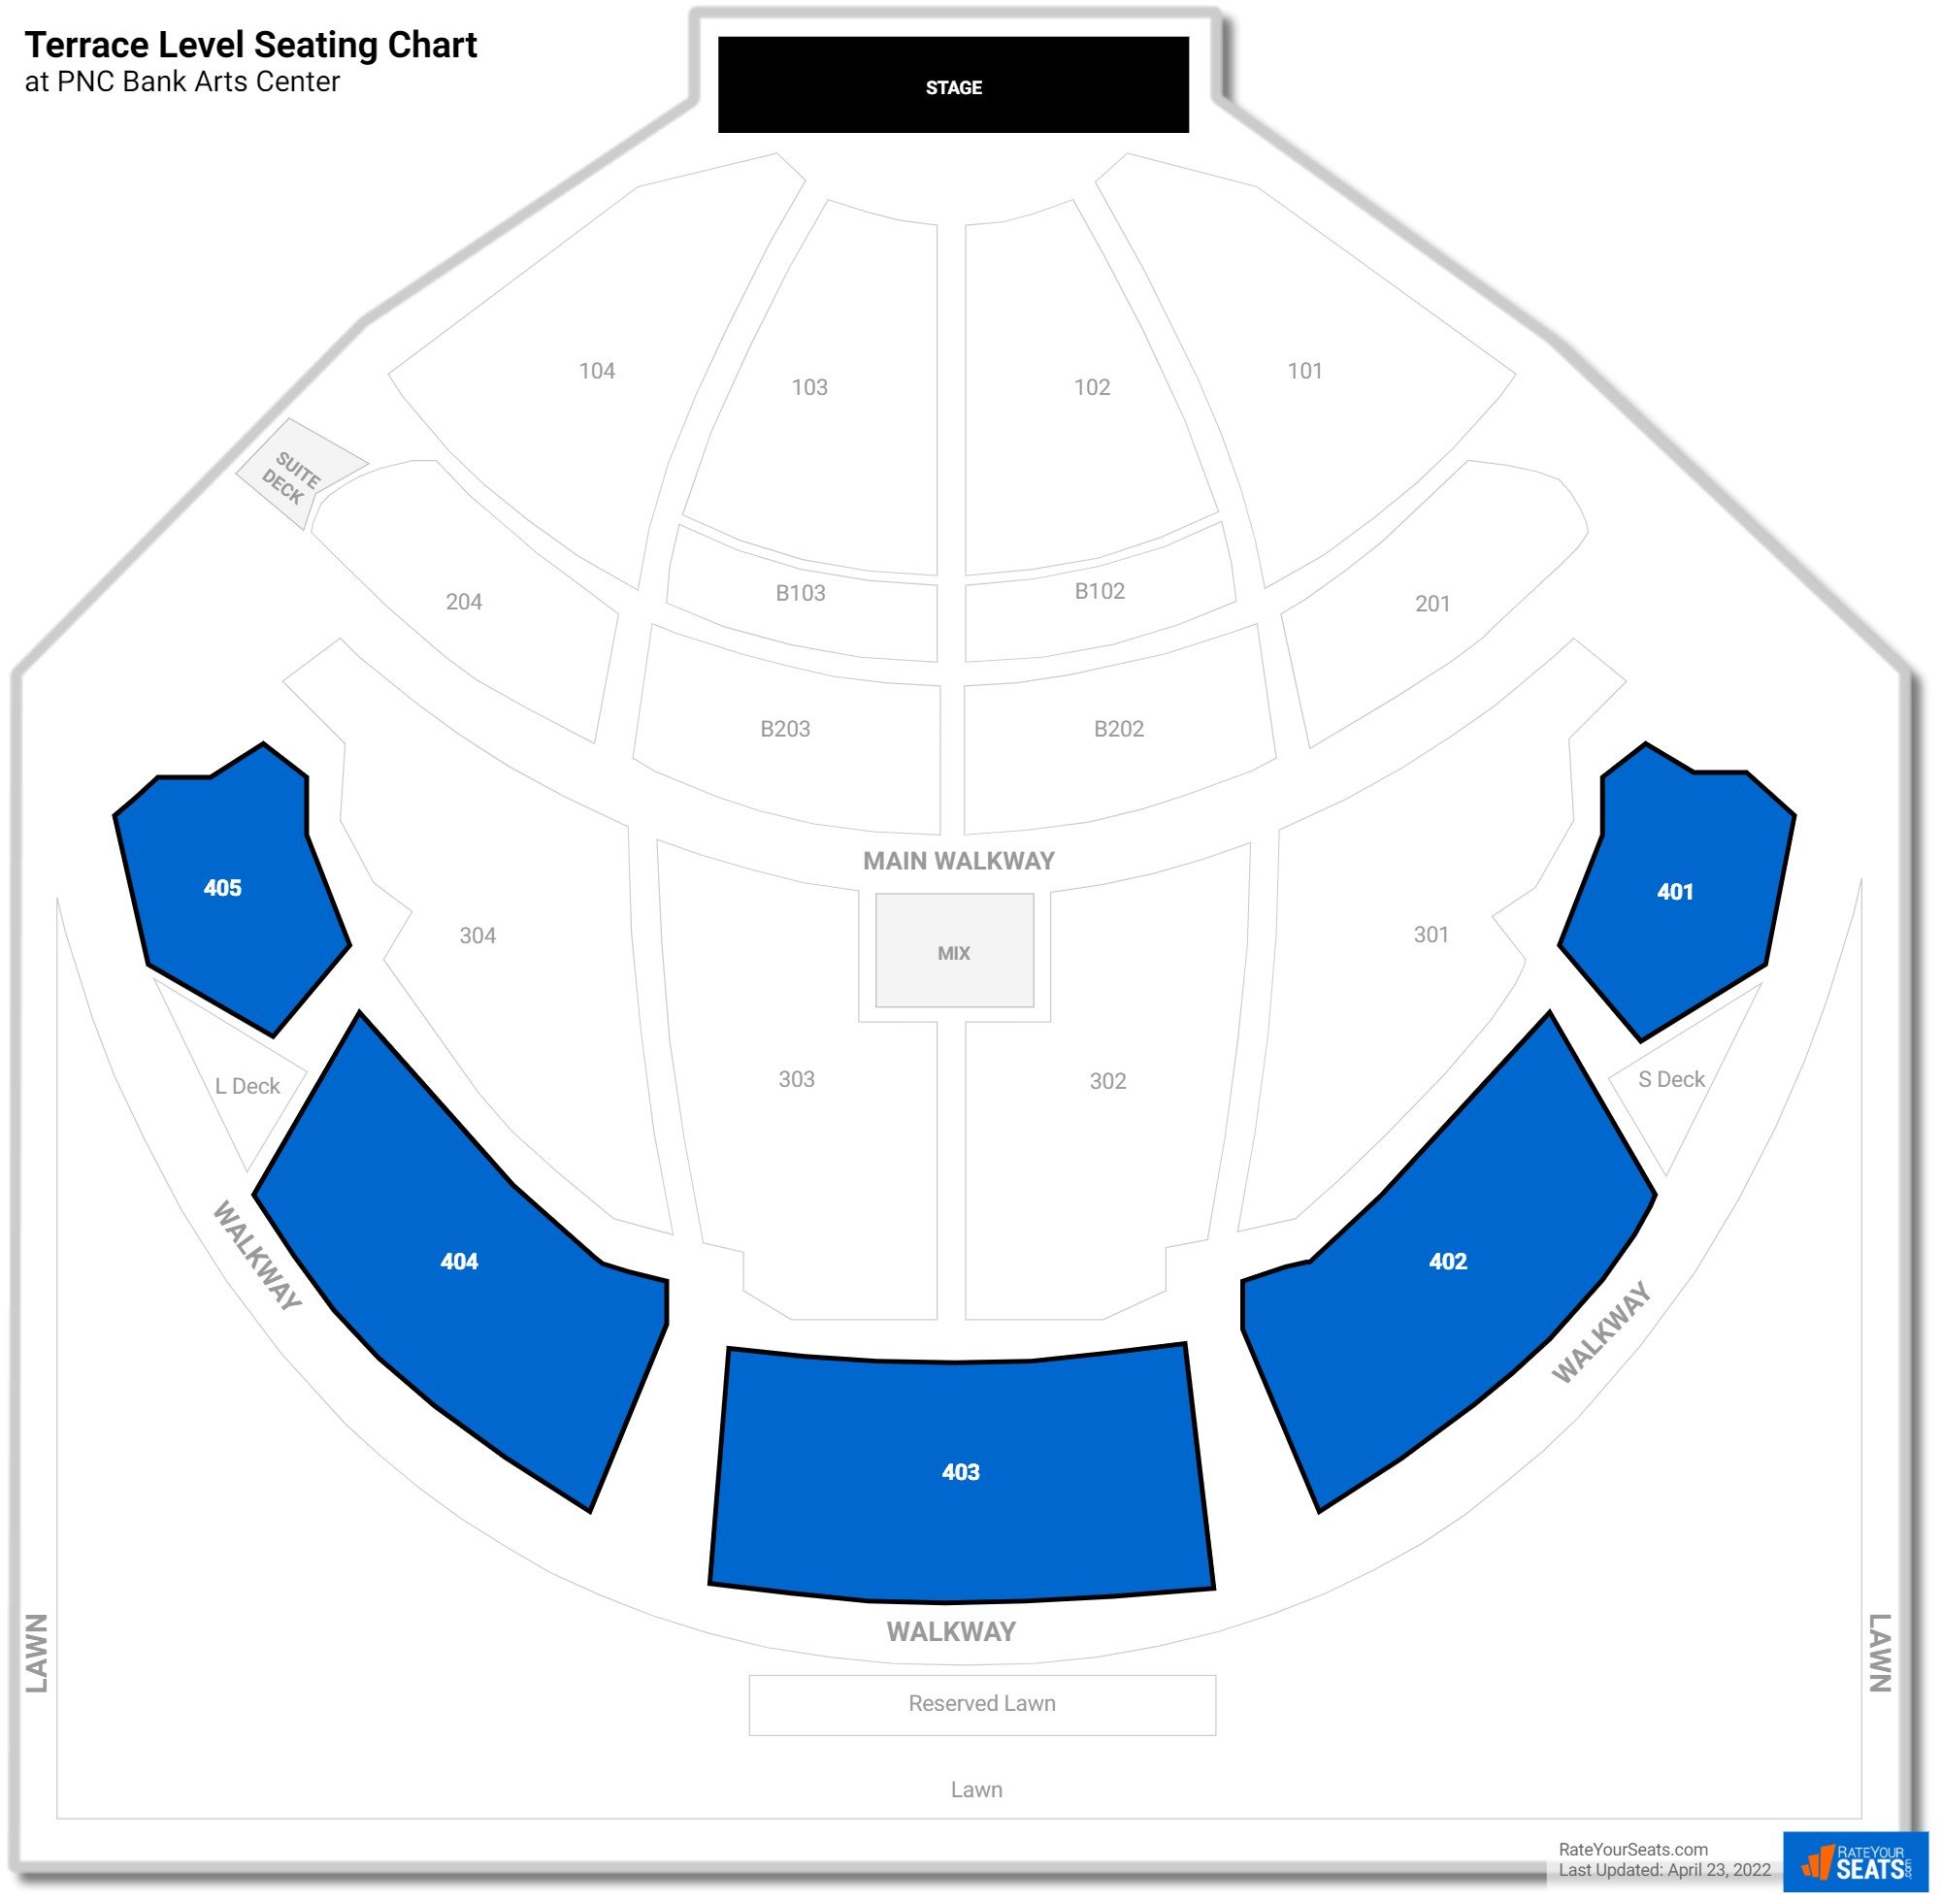 Concert Terrace Level Seating Chart at PNC Bank Arts Center